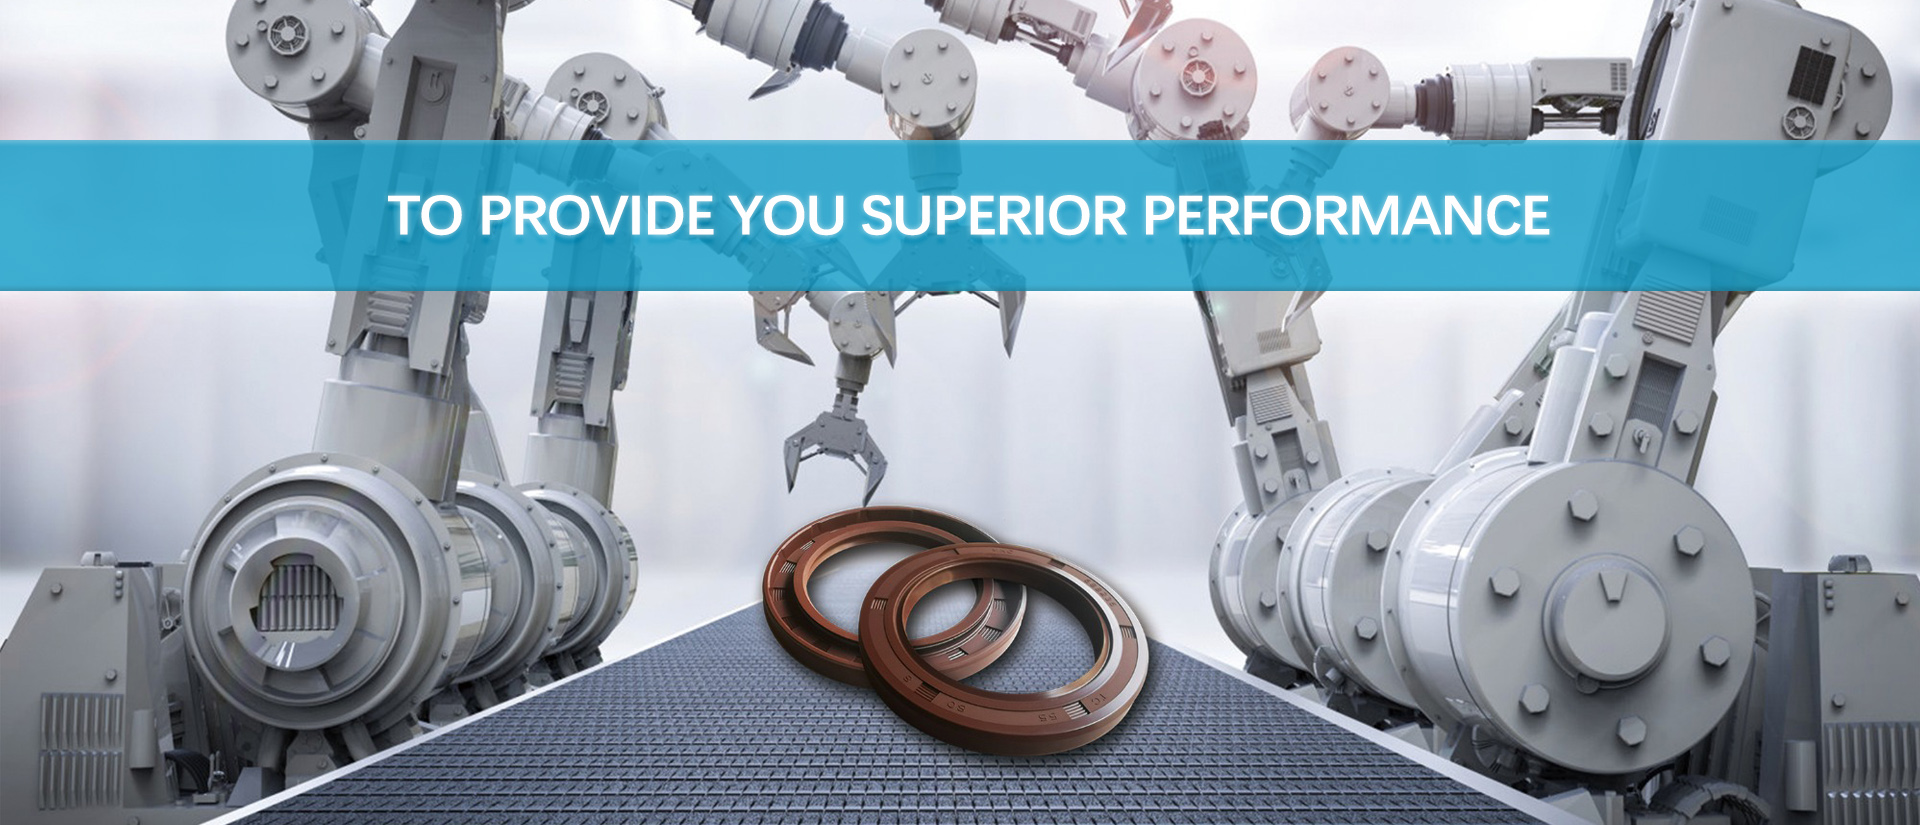 TO PROVIDE YOU SUPERIOR PERFORMANCE